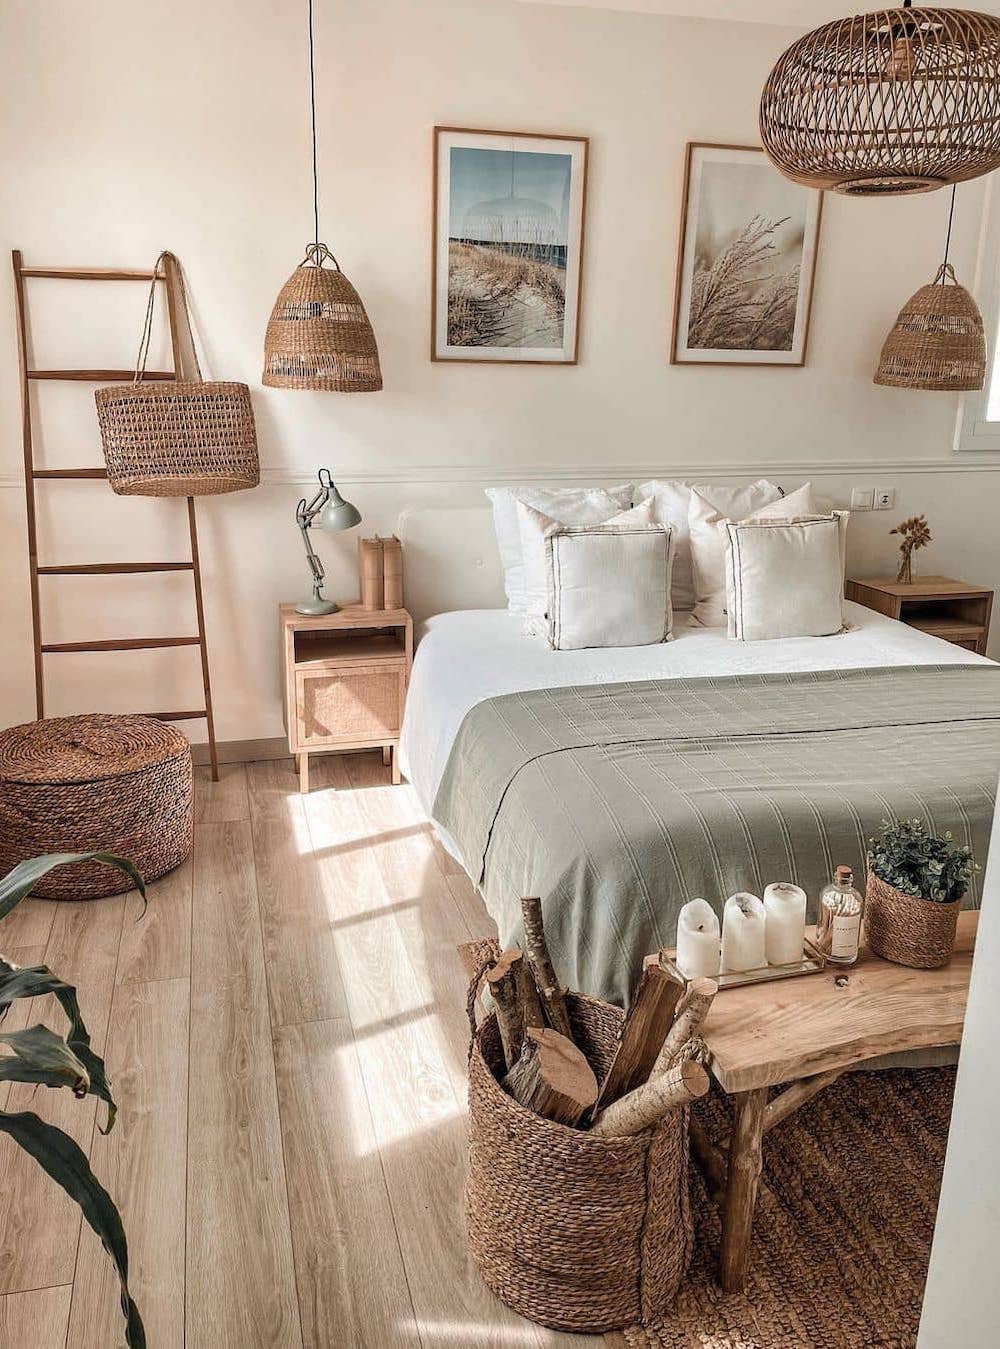 a coastal boho bedroom with woven baskets, natural wood furniture, ocean-inspired wall art and soft earthy tones